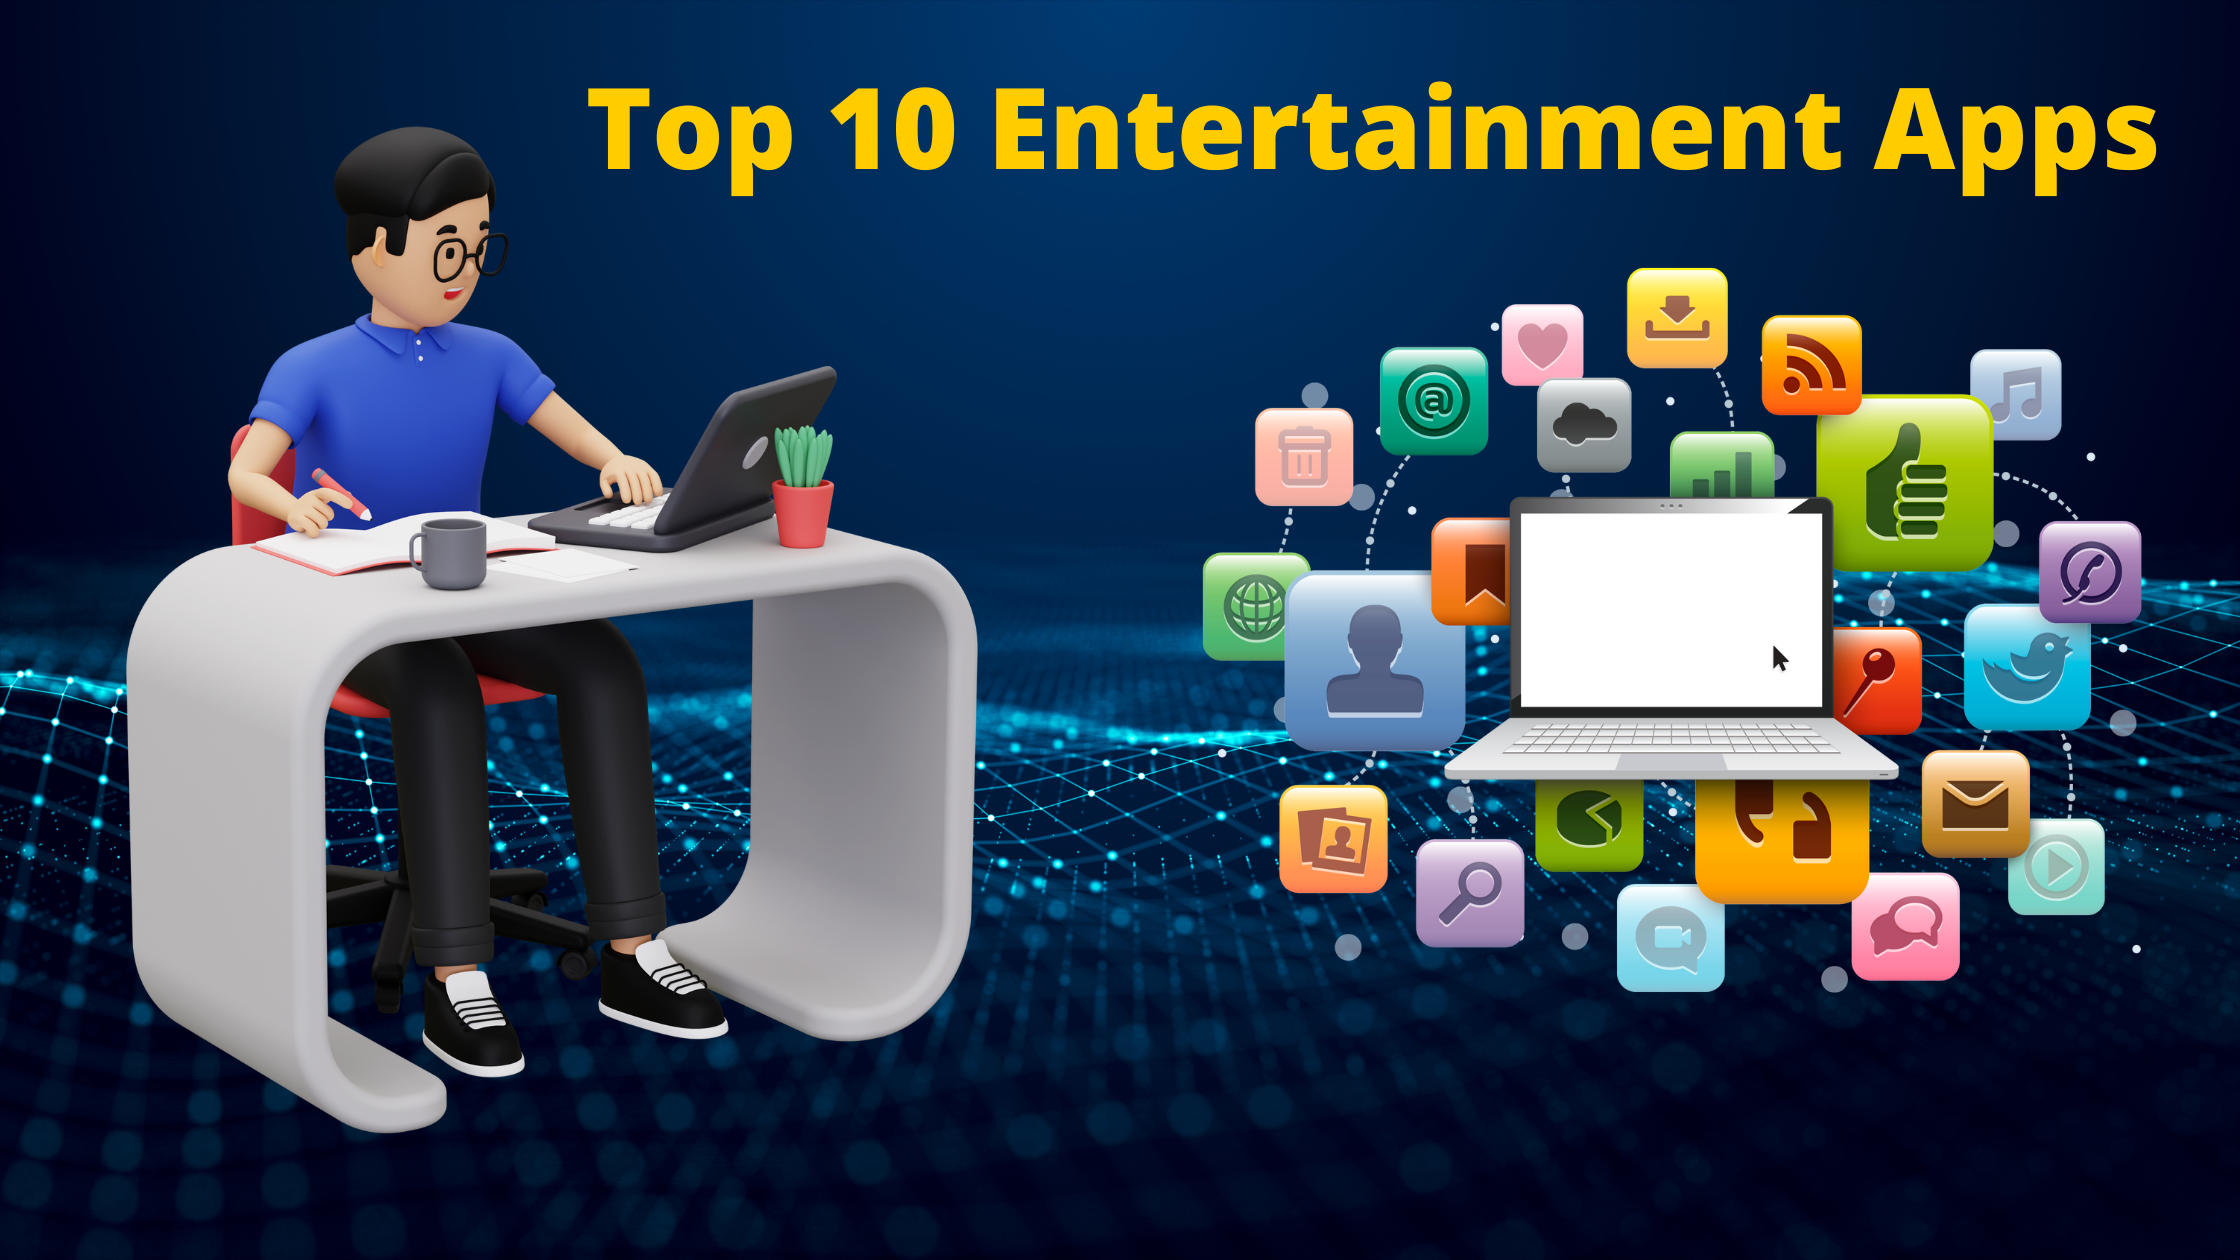 Unleashing Entertainment: The Top 10 Apps You Can't Miss!